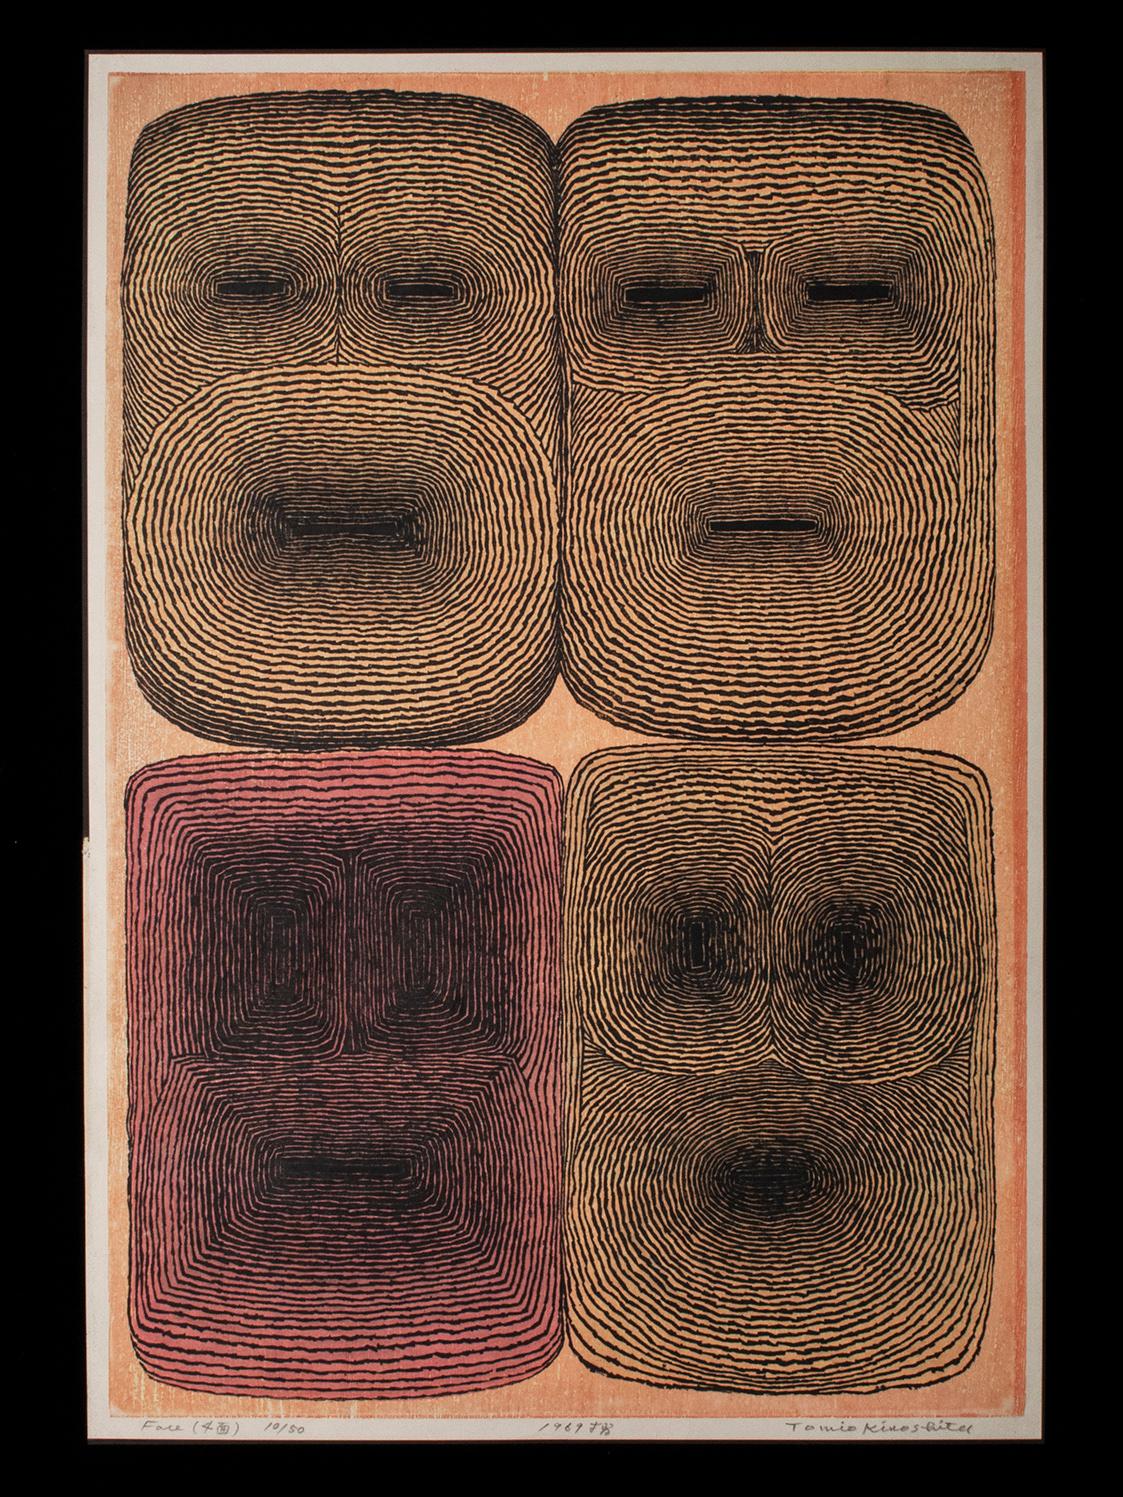 Faces (4 Faces), 1969
Tomio Kinoshita (1923-2014), Japan
Woodblock print
Paper, pigment, sumi ink
Image: 27 high by 18.25 inches wide (68.5 by 46.4 cm)
Paper size: 28 high by 19 inches wide (71 by 48 cm)
Edition: 10/50

This is a rare early